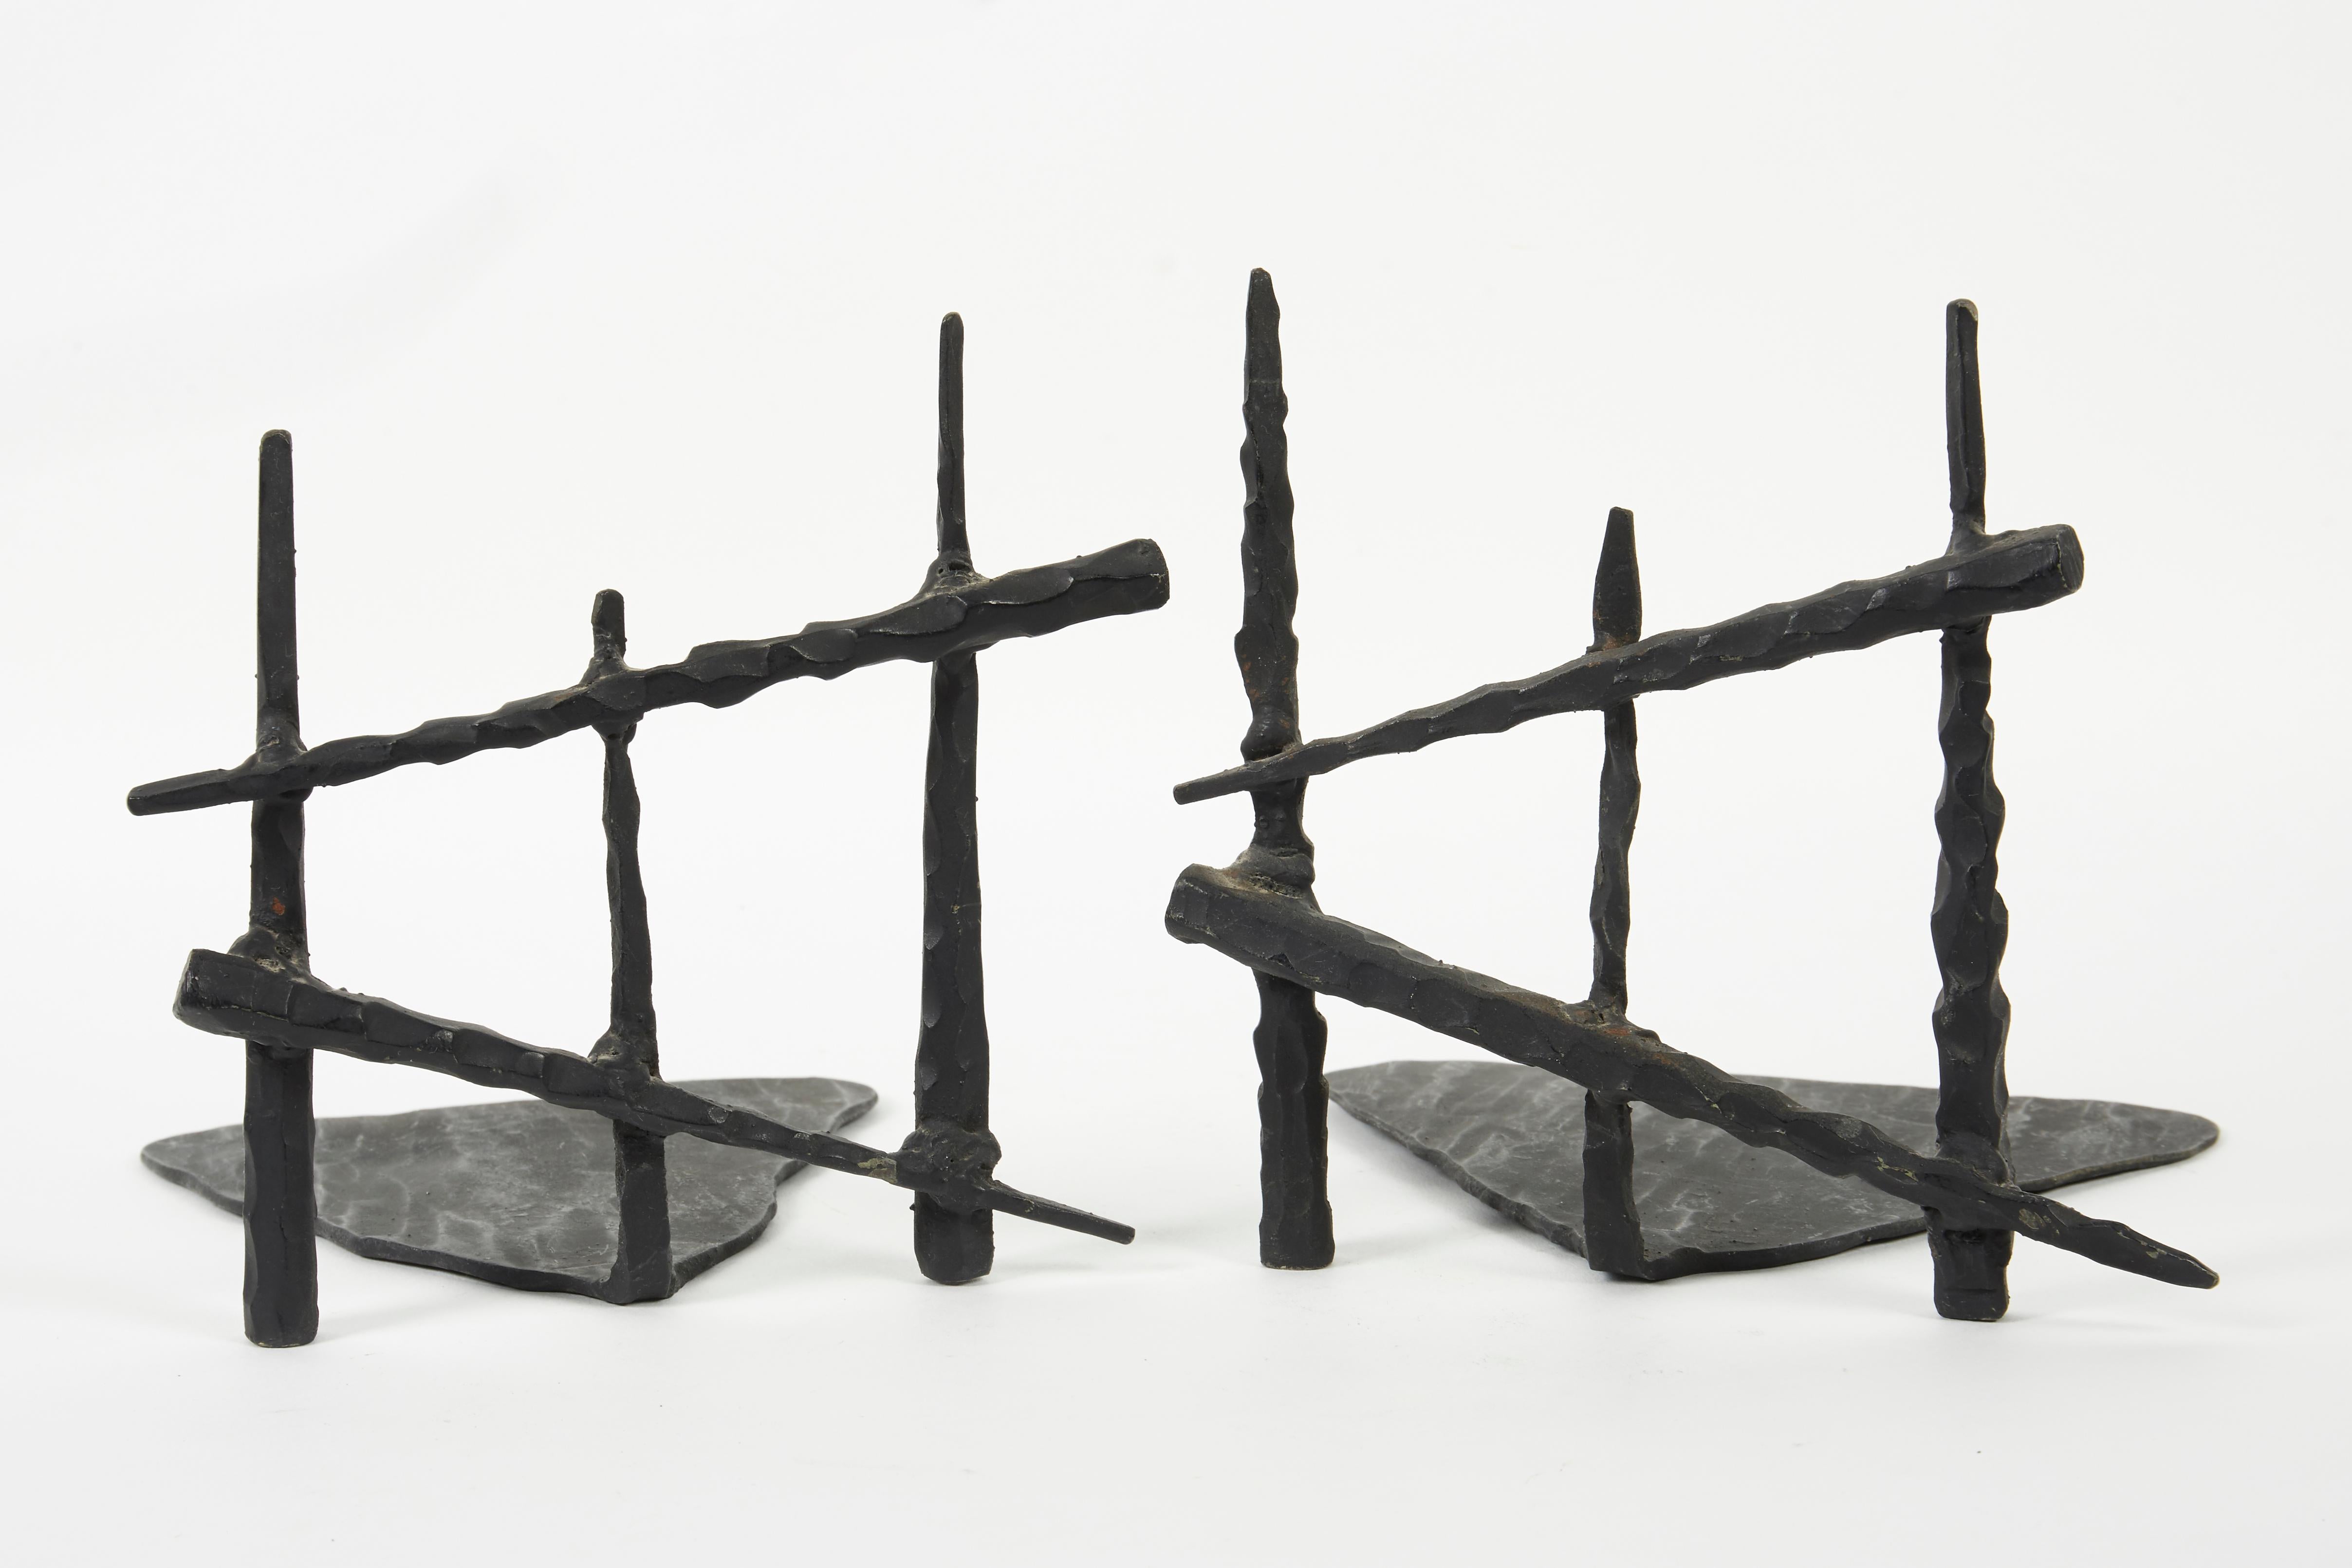 Hand-Crafted Mid-20th Century Pair of Brutalist Iron Bookends by David Palombo For Sale